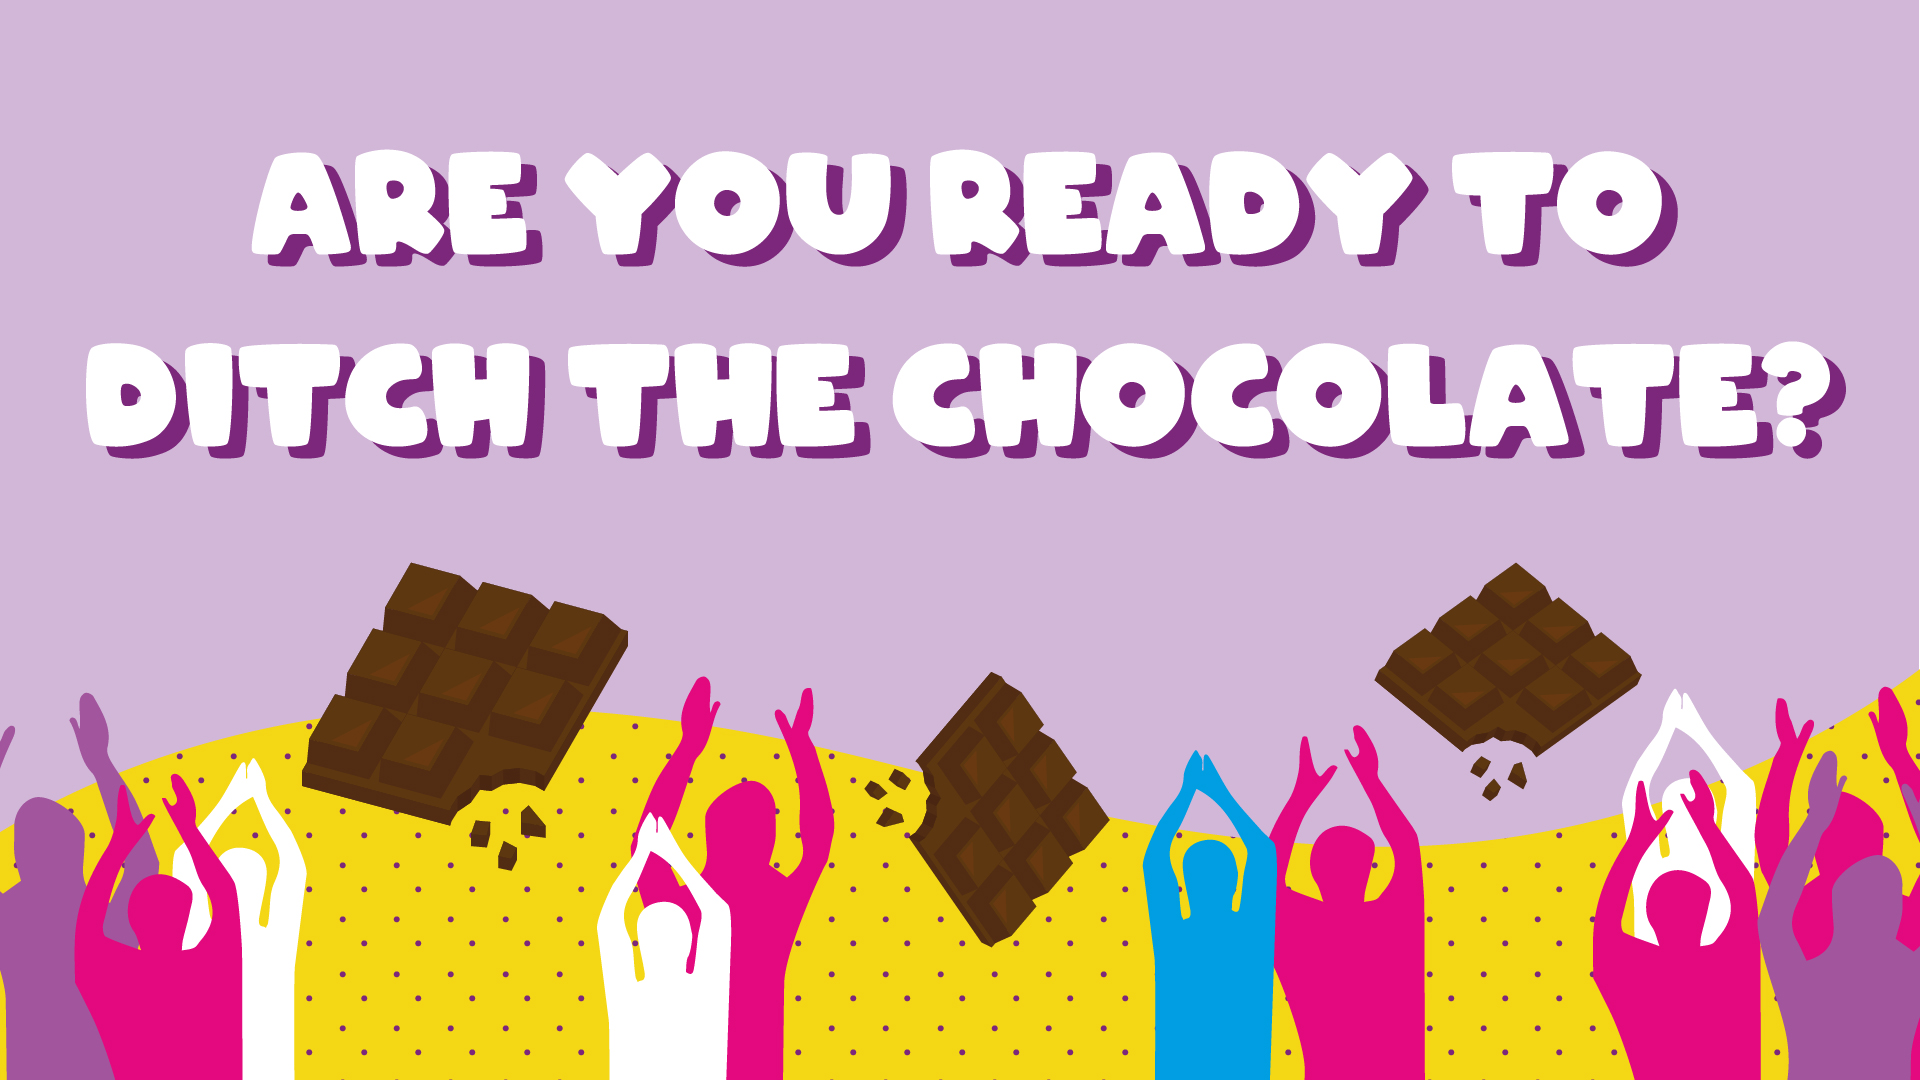 Are you ready to ditch the chocolate?